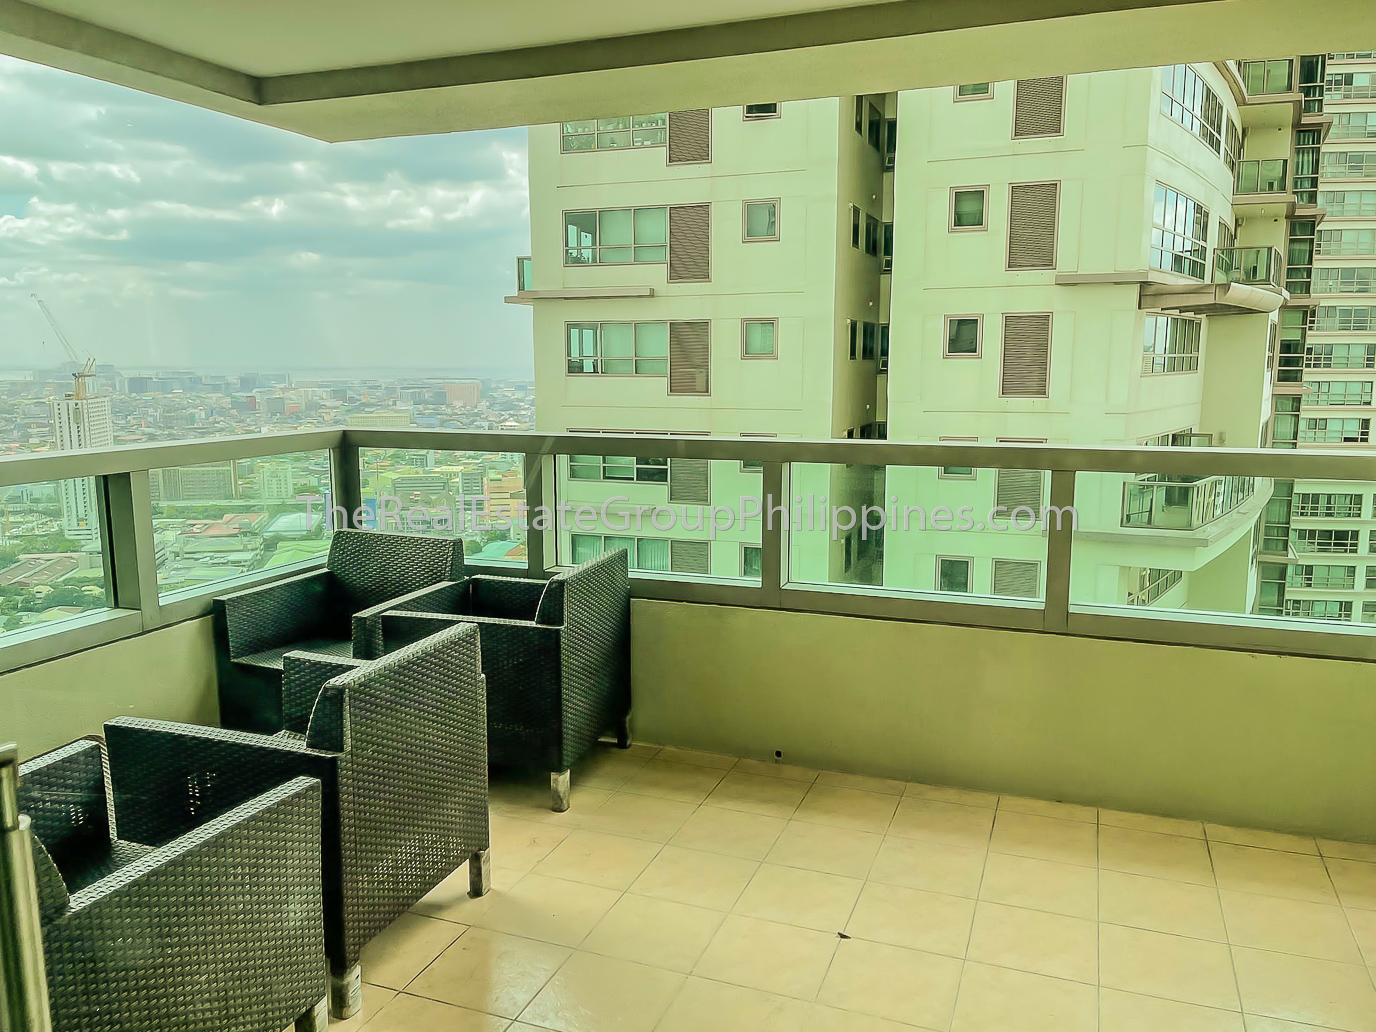 3 Bedroom For Sale The Residences At Greenbelt Makati5